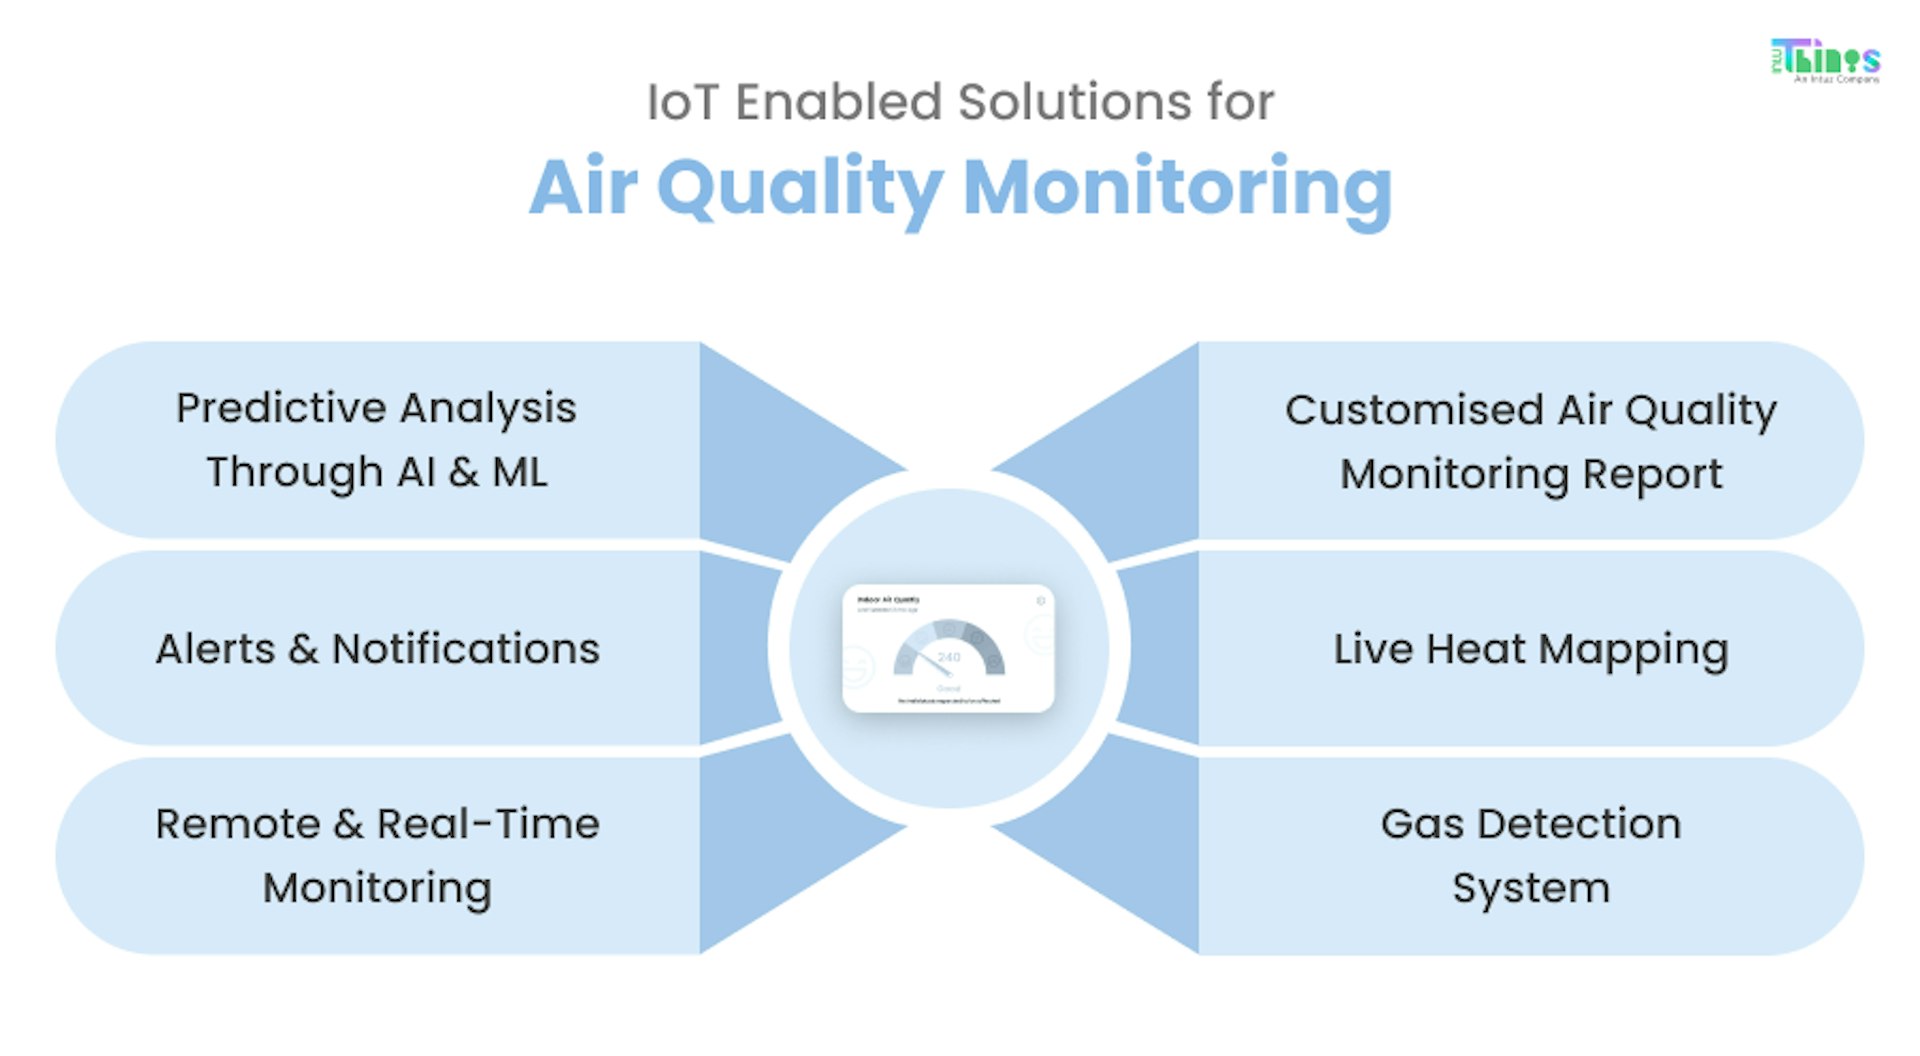 IoT solutions for air quality monitoring